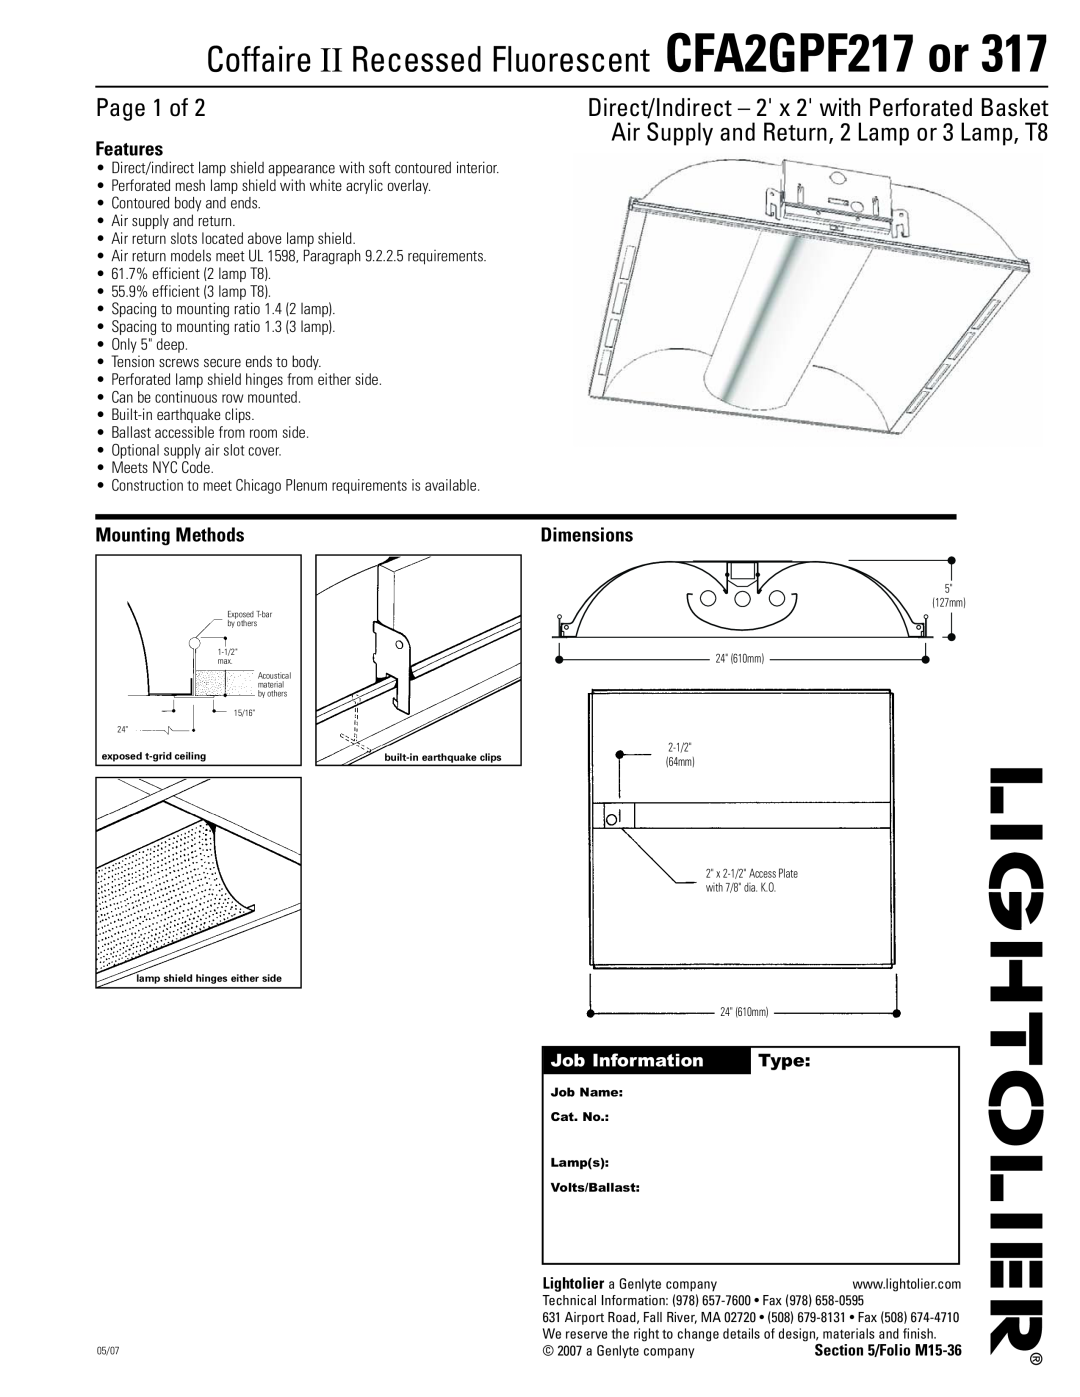 Lightolier CFA2GPF217 or 317 dimensions Coffaire II Recessed Fluorescent CFA2GPF217 or, Page 1 of, Features, Dimensions 